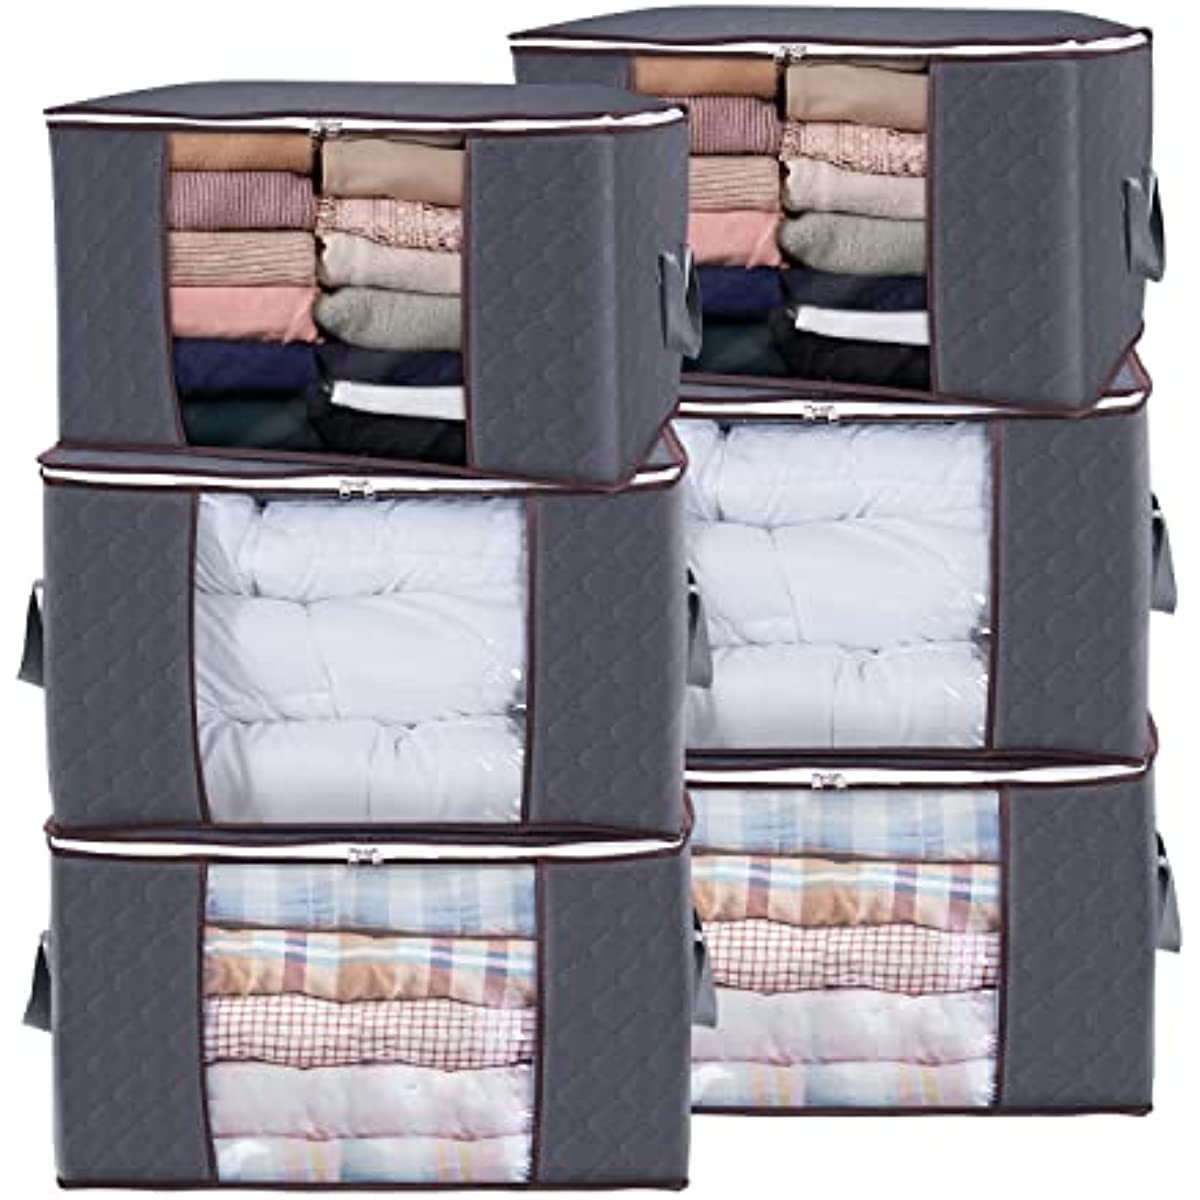 Clothes Storage - Buy clothes storage ideas online at affordable price in  india. - IKEA